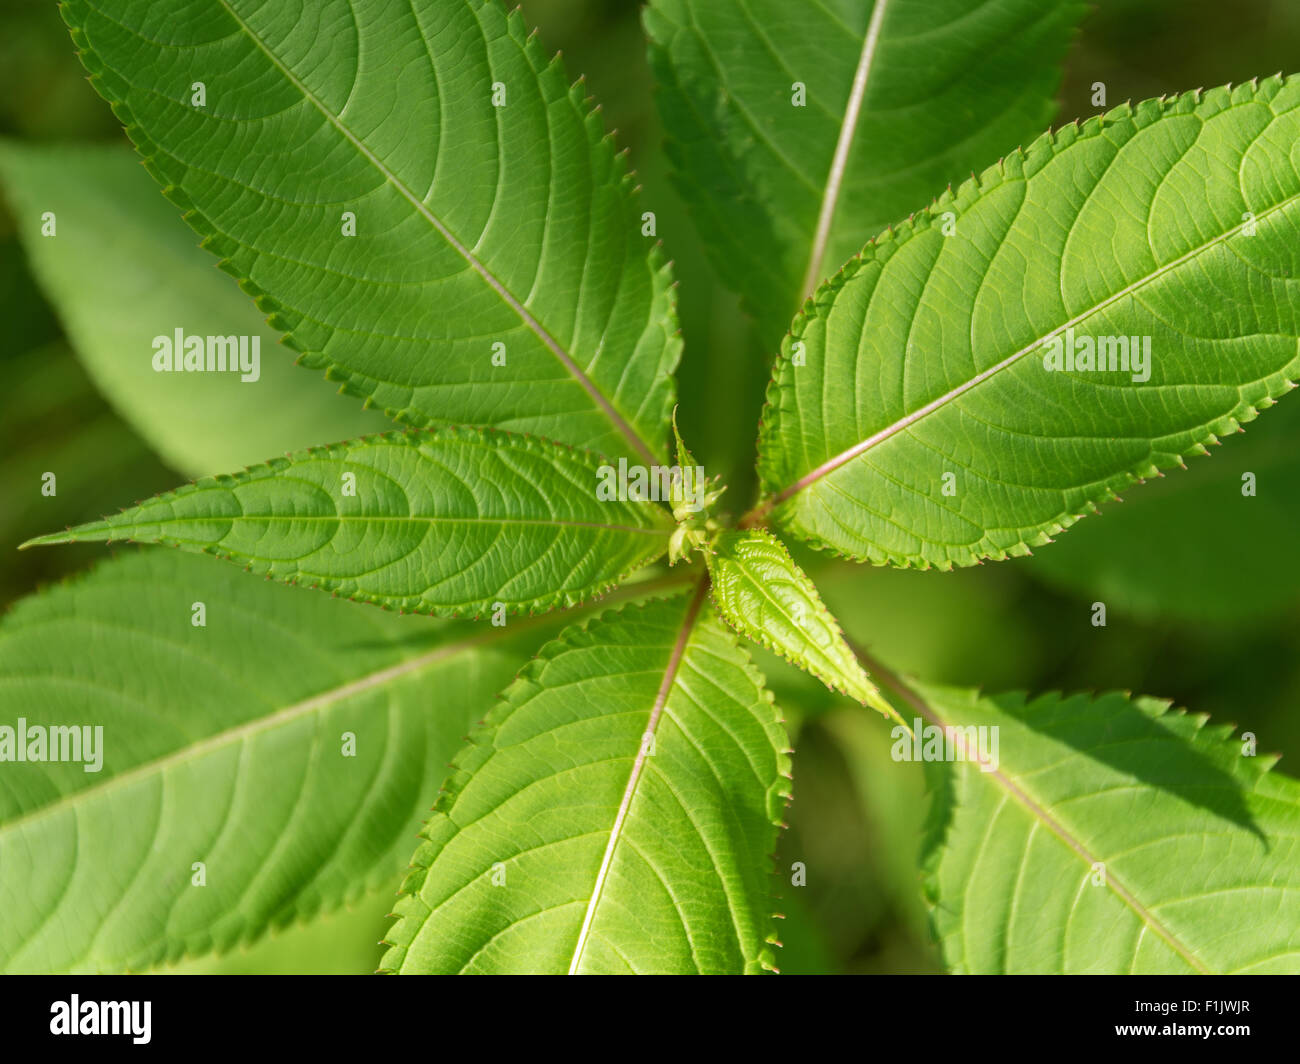 detail shot showing the leaves of the bobby tops flower seen from above Stock Photo